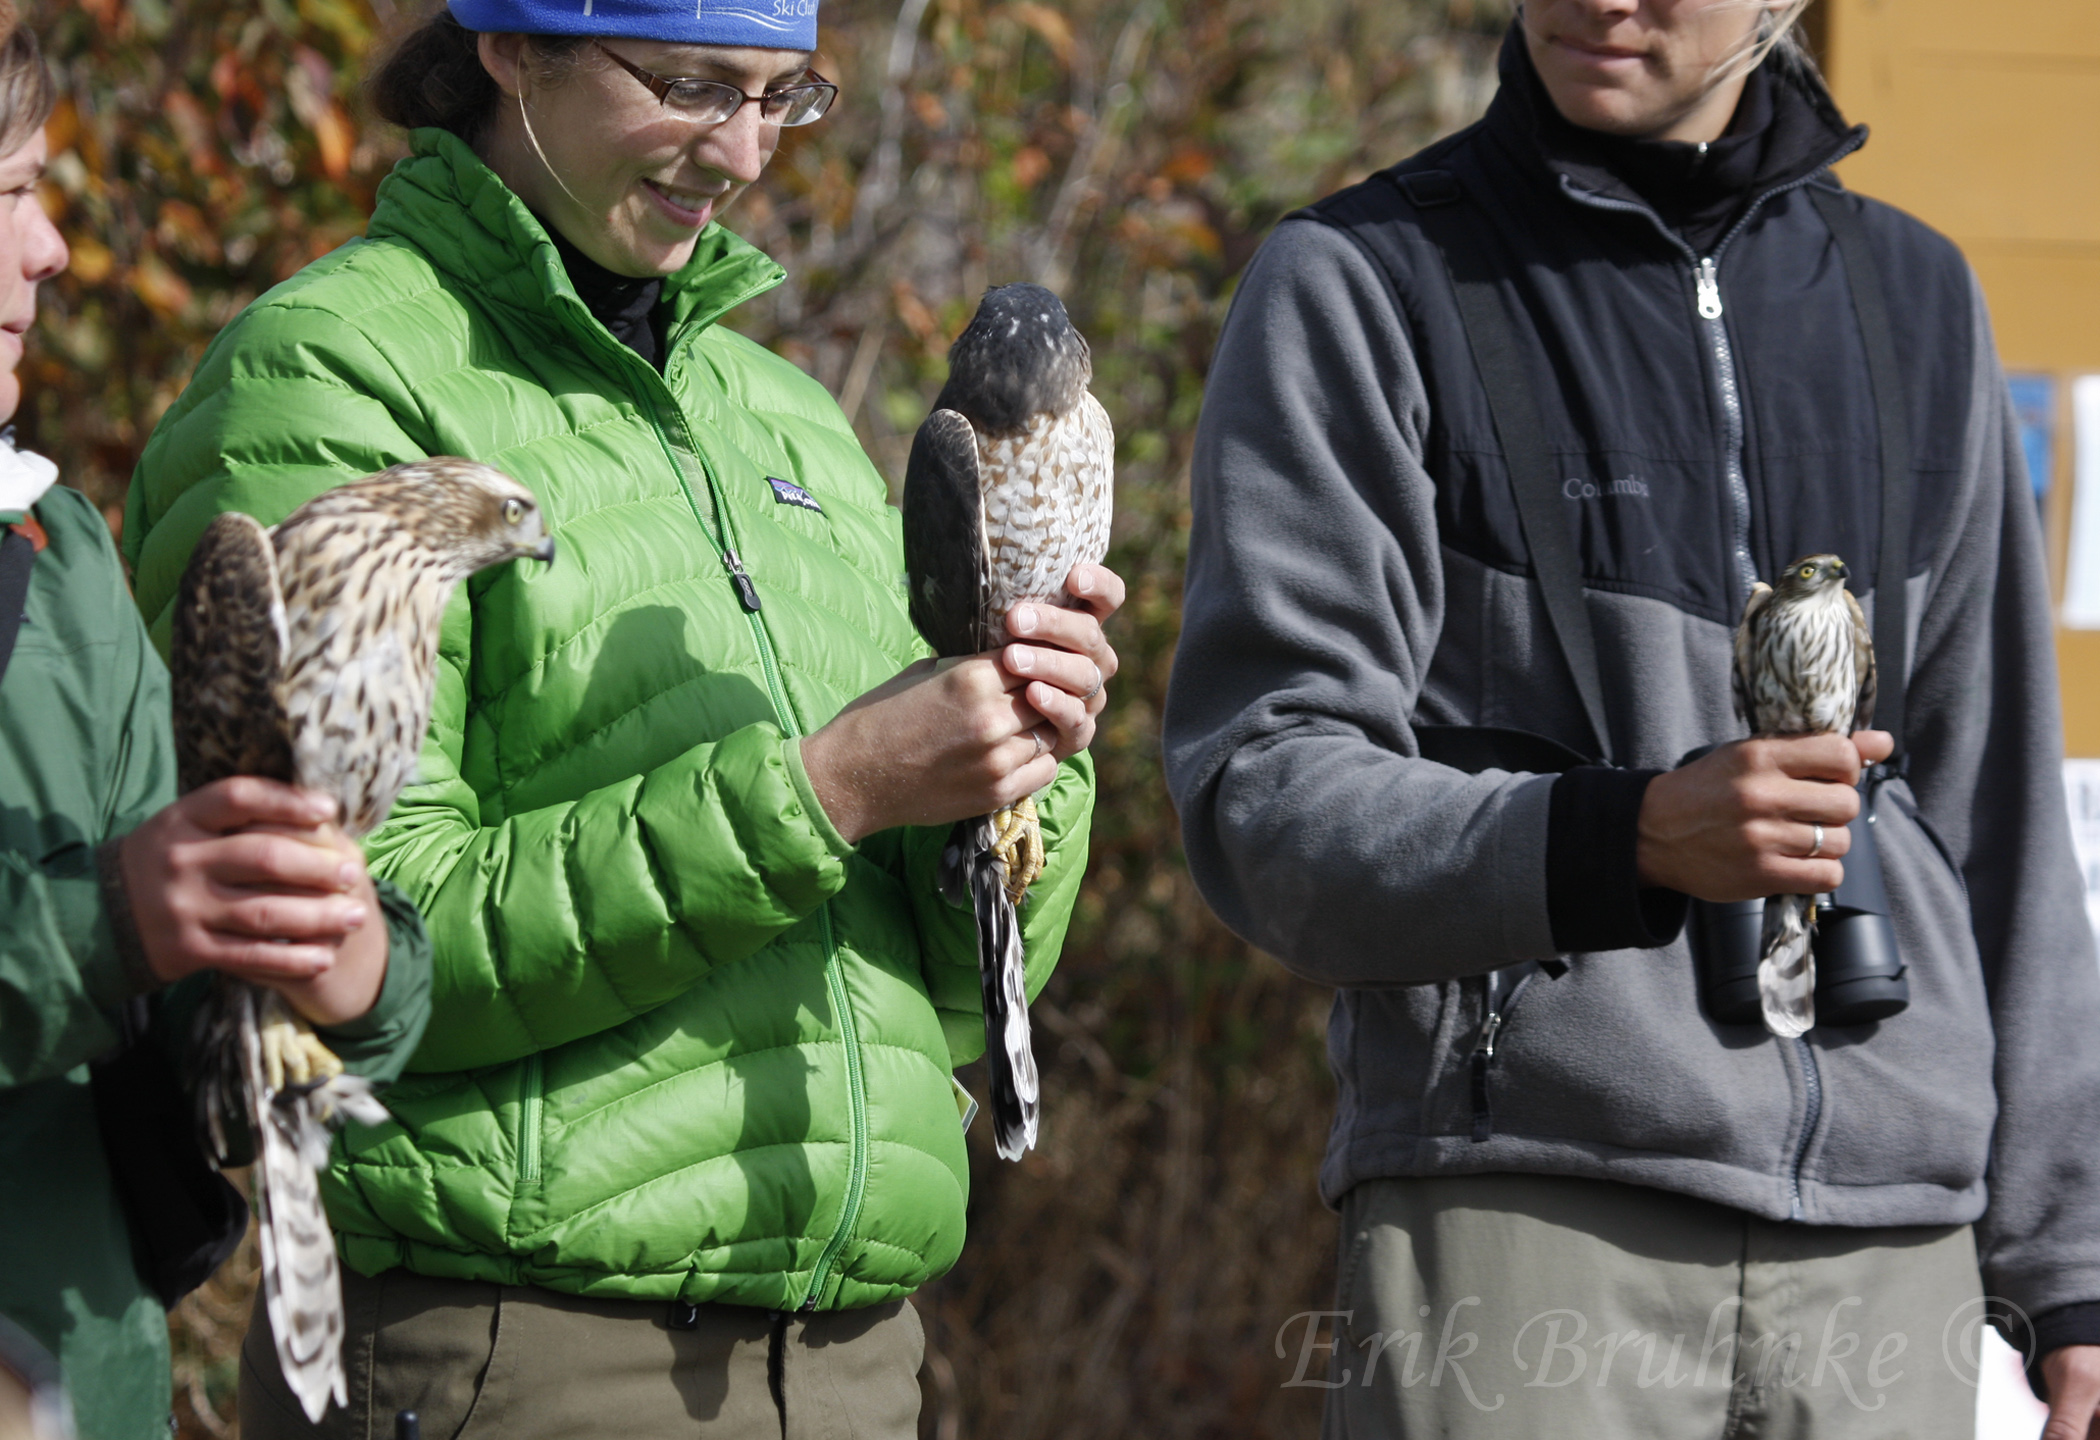 From left to right - Juvenile Northern Goshawk, adult Coopers Hawk, juvenile Sharp-shinned Hawk